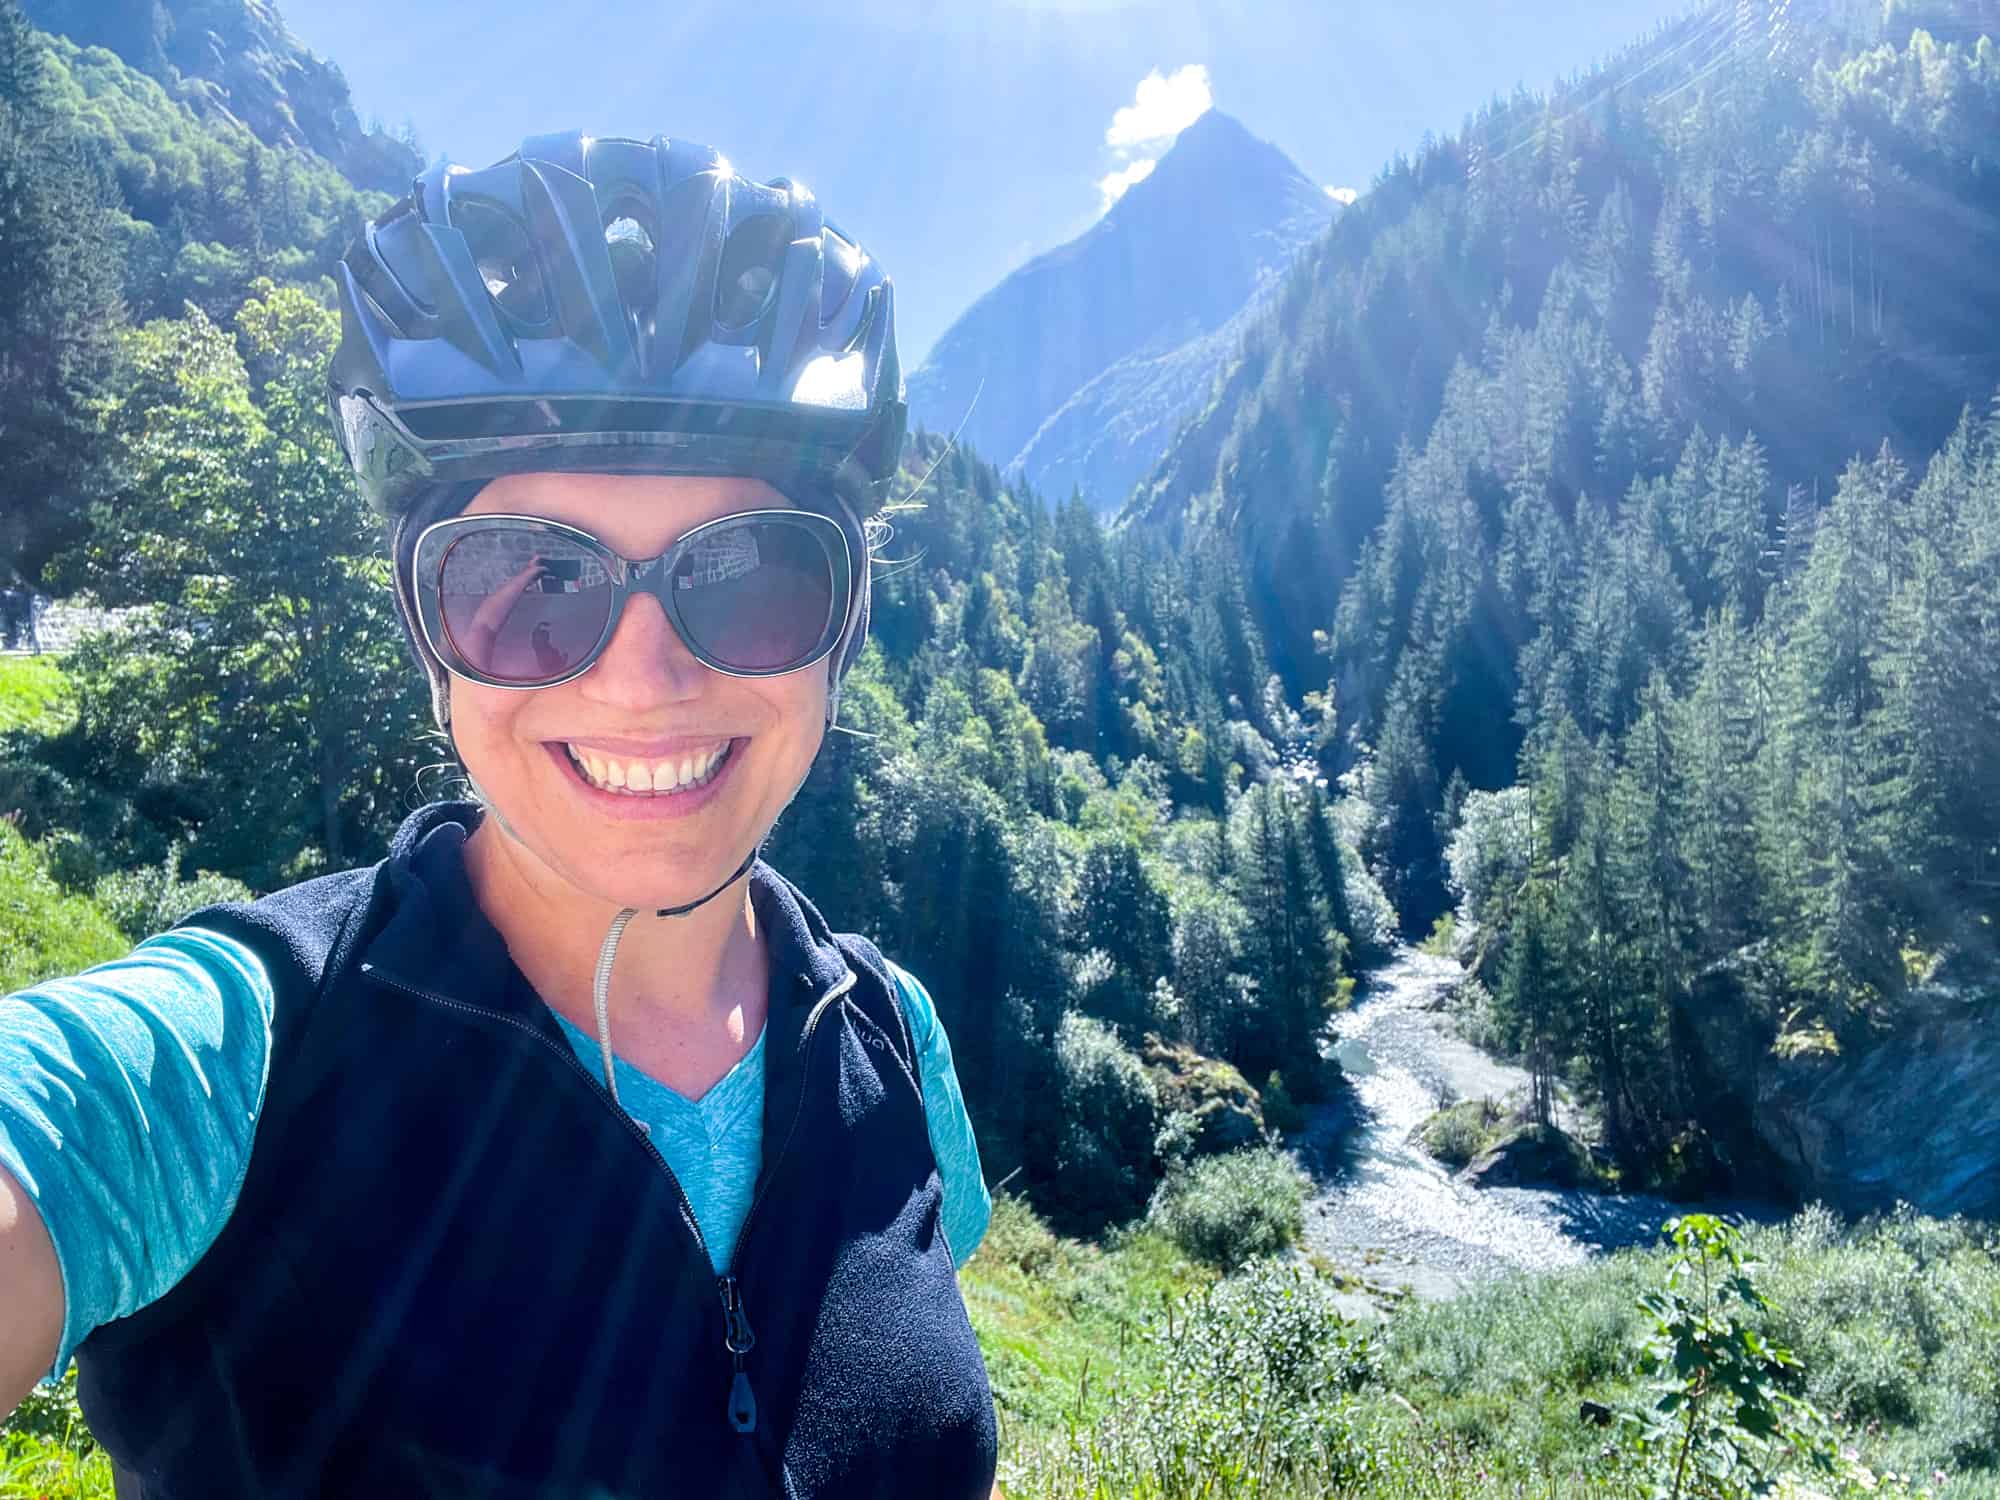 Switzerland - Verbier ebike experience - Abigail King cycling in the mountains selfie